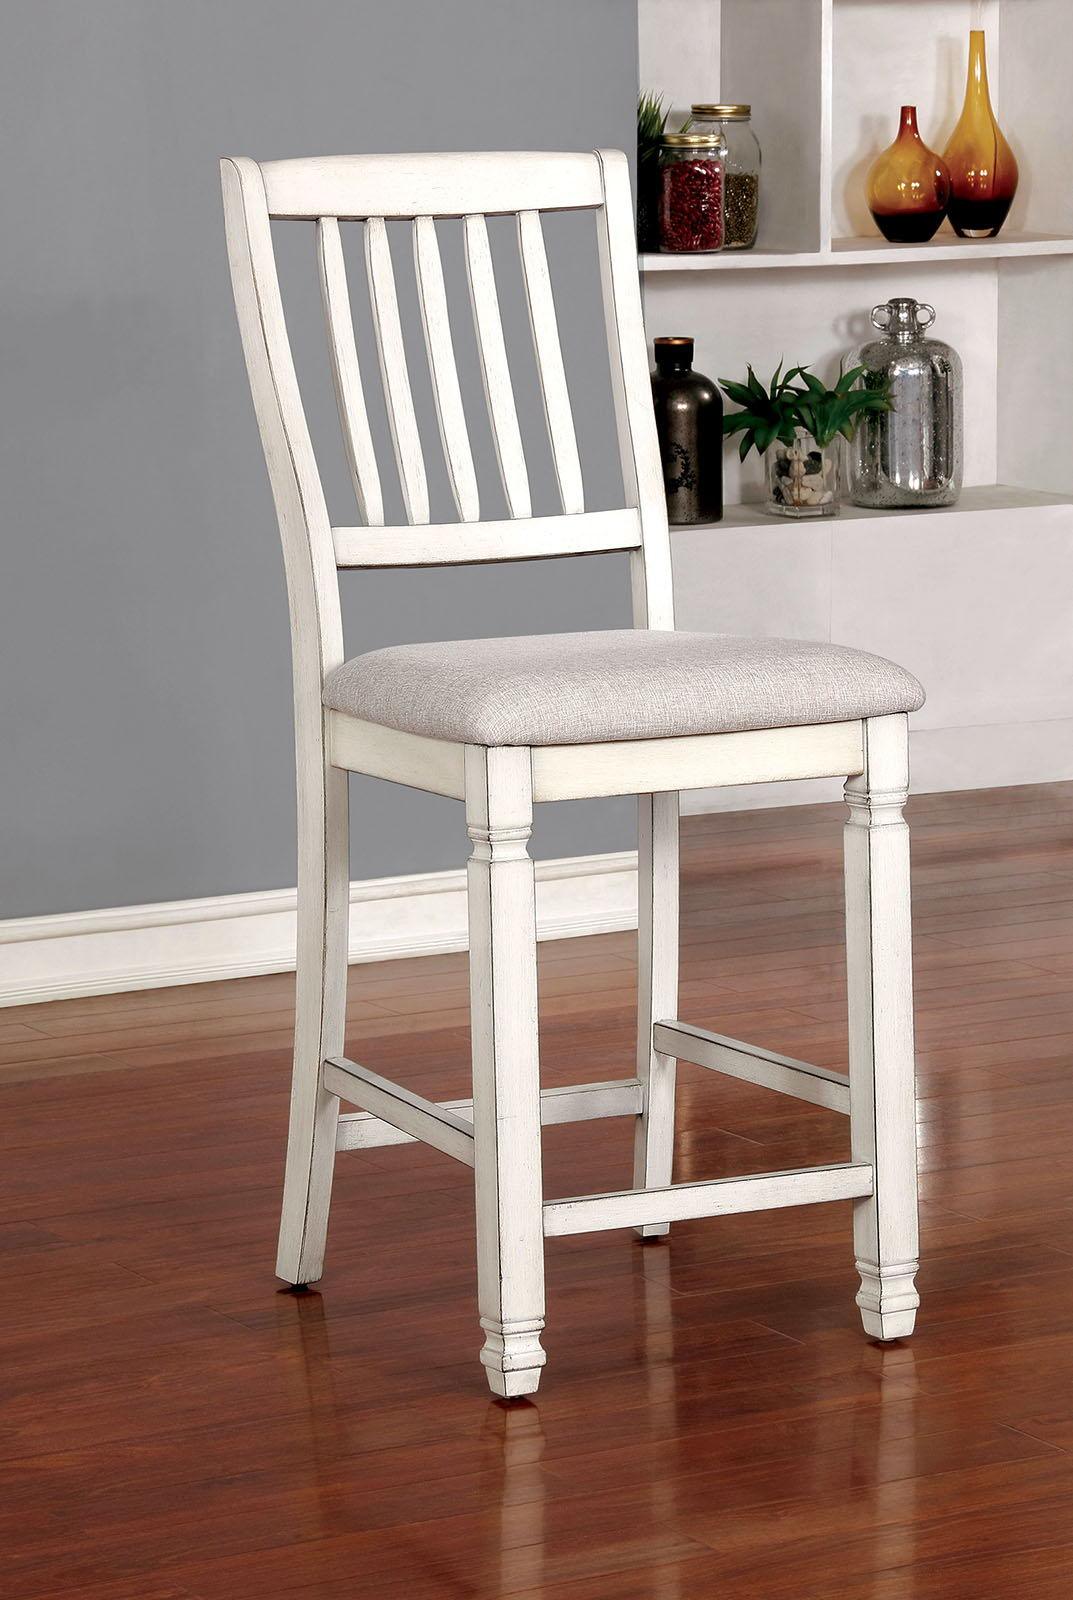 Furniture of America - Kaliyah - Counter Height Chair (Set of 2) - Antique White - 5th Avenue Furniture